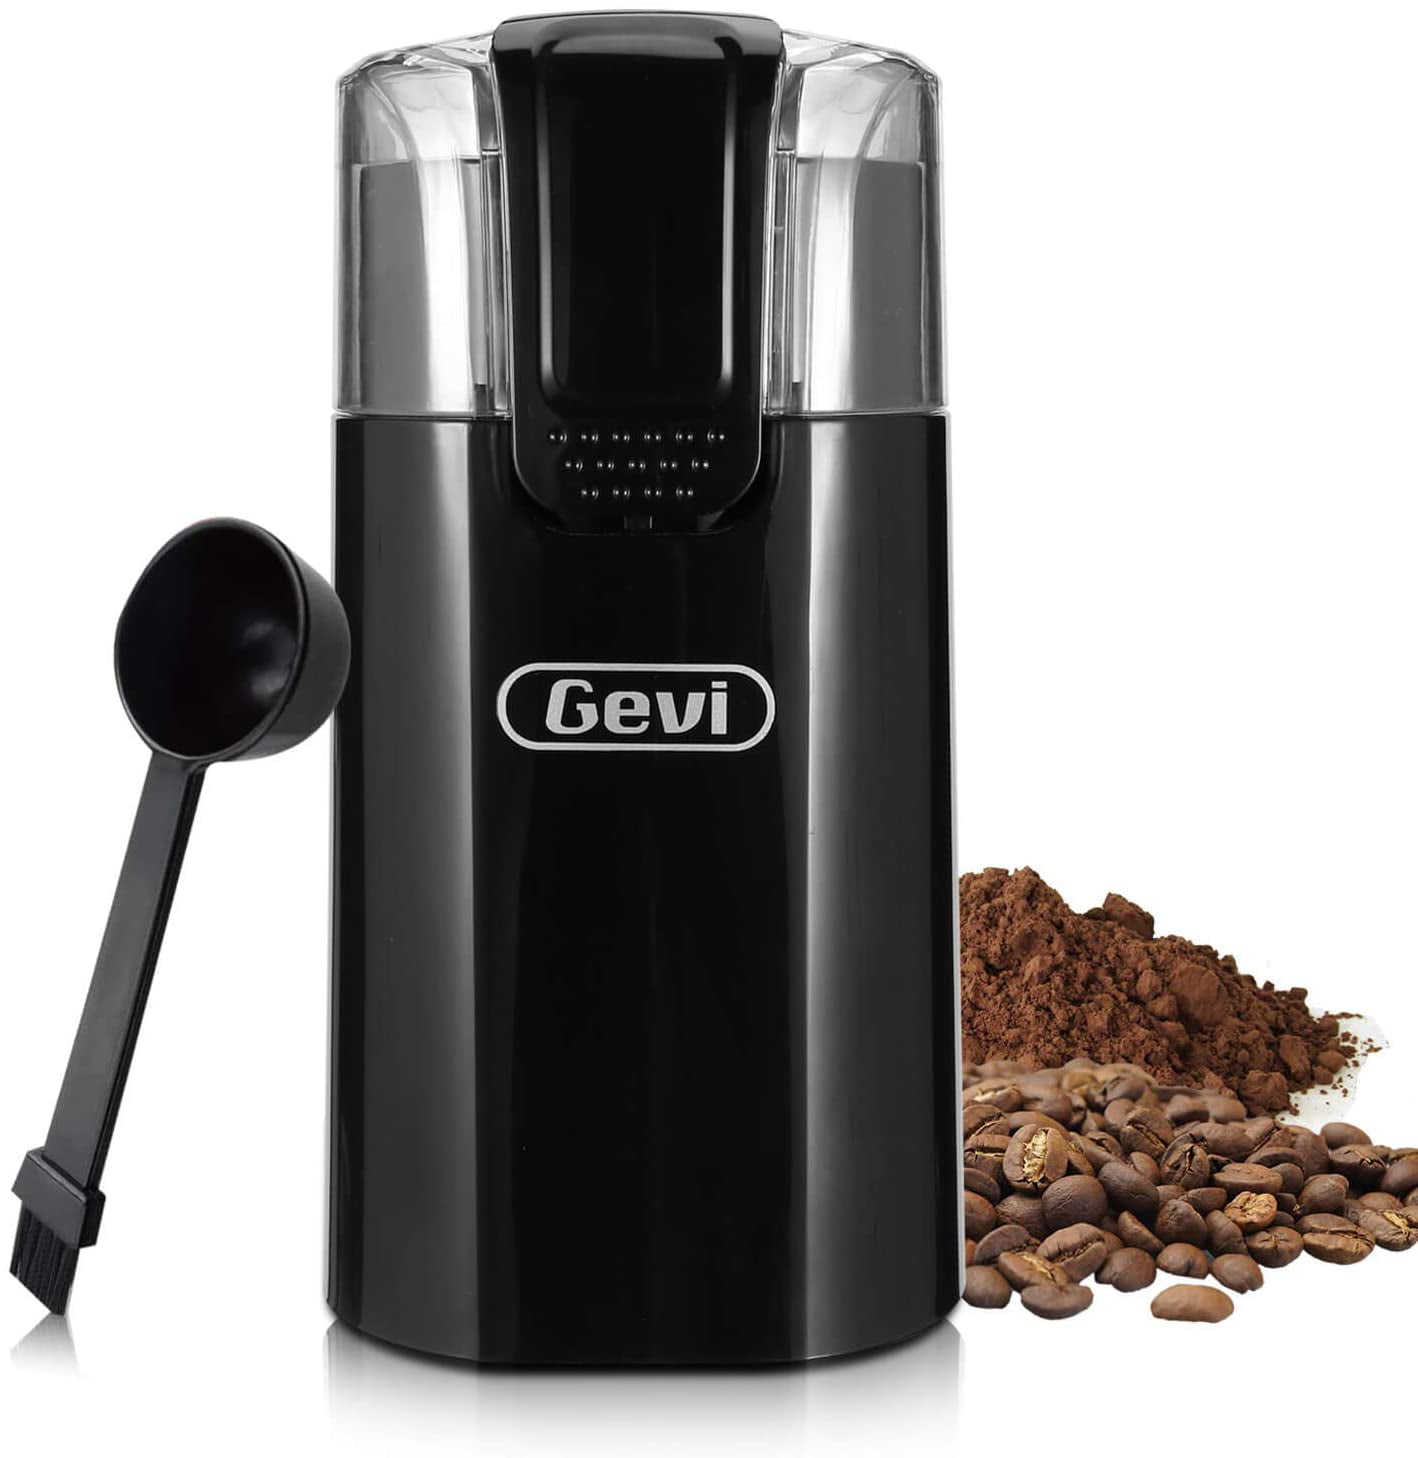 Clear Lid Sugar 50g/8 Cups Gevi 150W Spice Grinder with Stainless Steel Blade & Bowl Black Coffee Grinder Electric Grains One-Touch Control Coffee Bean Grinder for Nuts